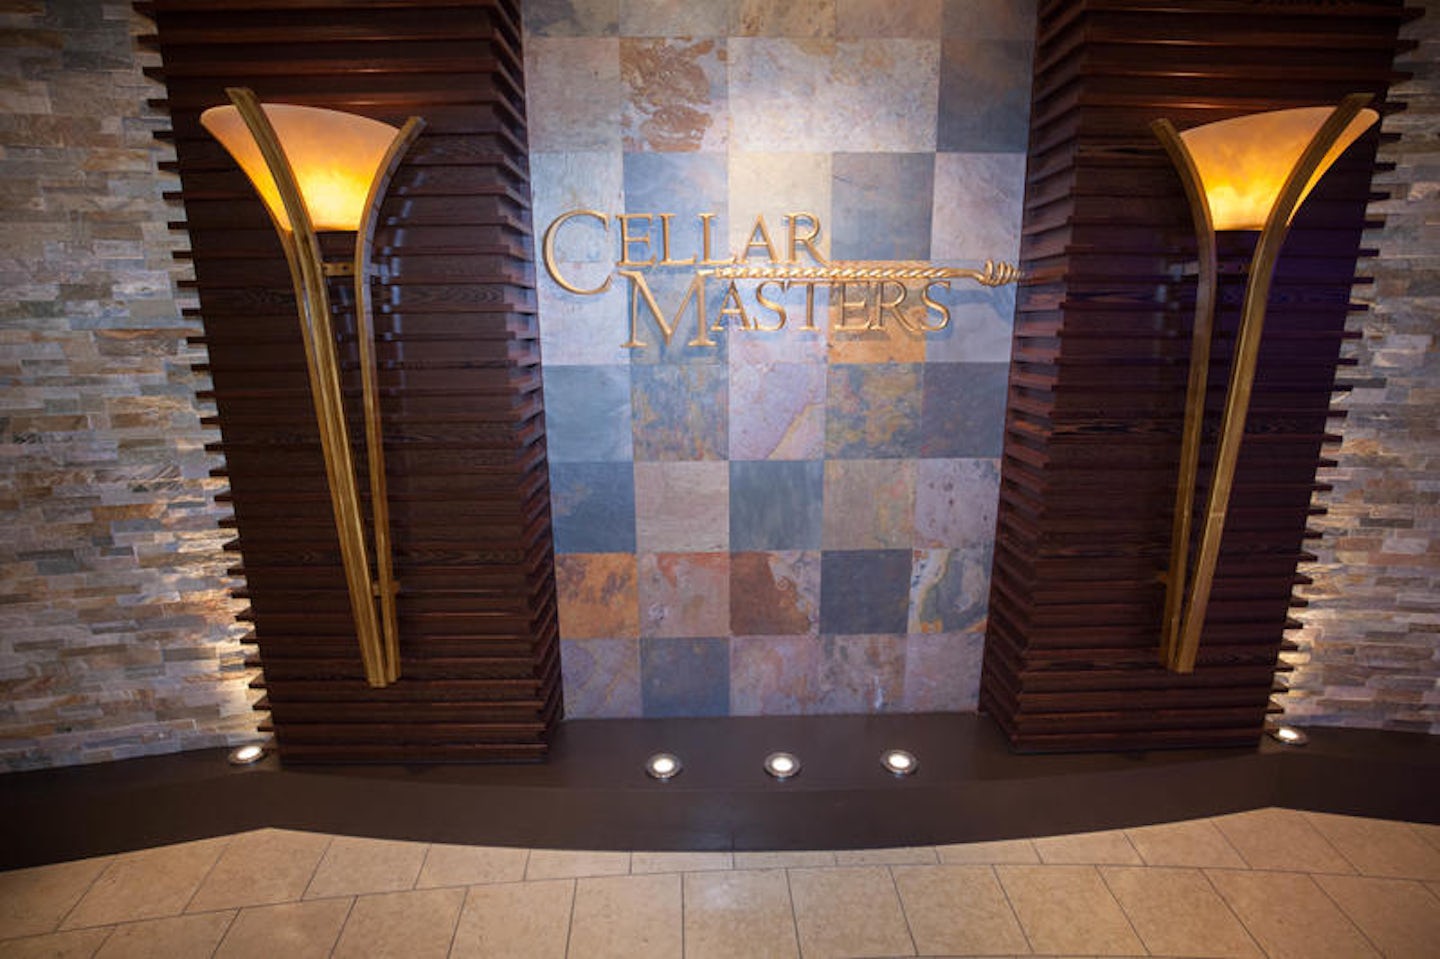 Cellar Masters on Celebrity Reflection